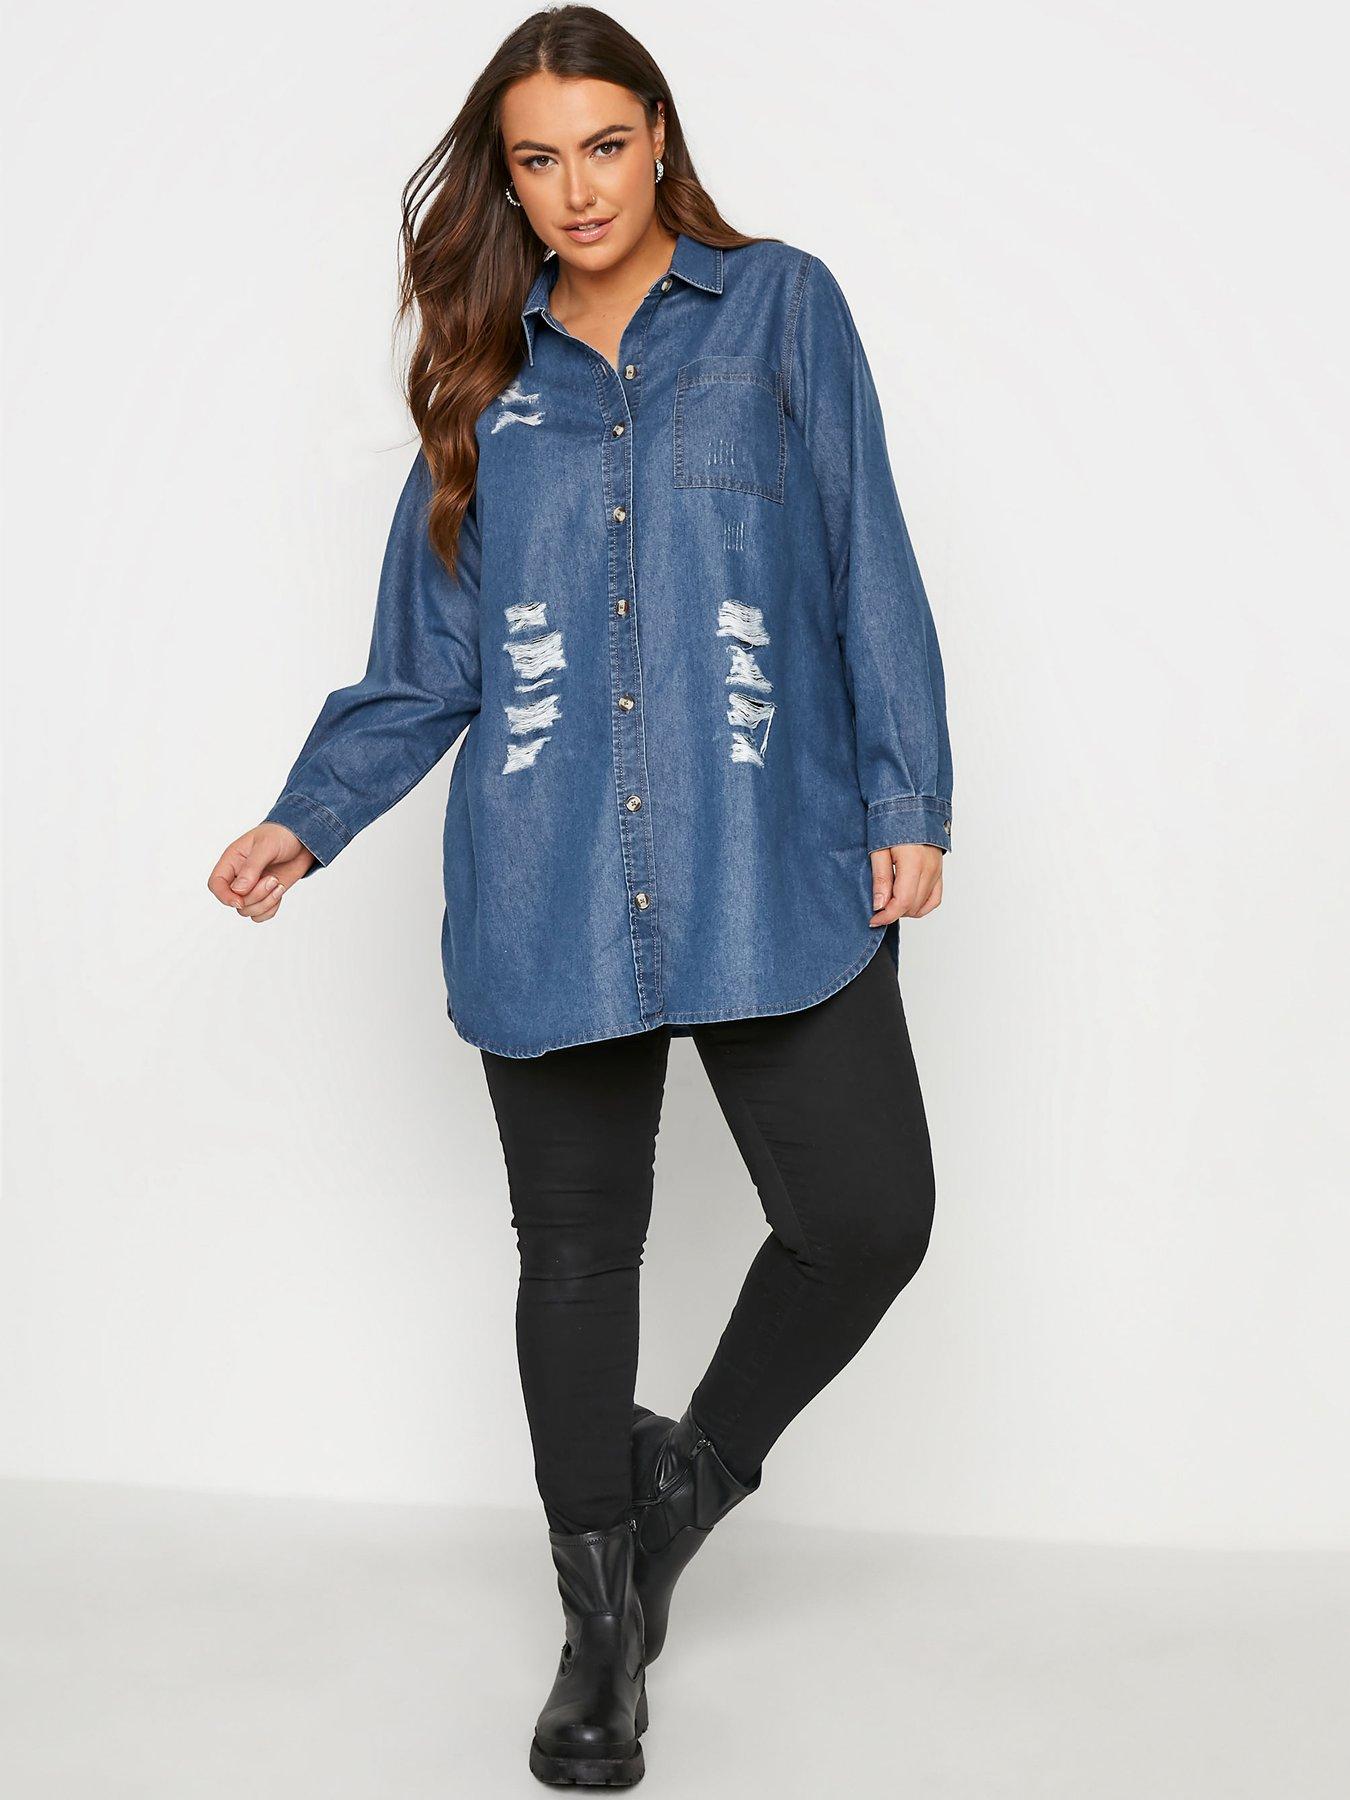  Yours Clothing Distressed Denim Shirt - Blue